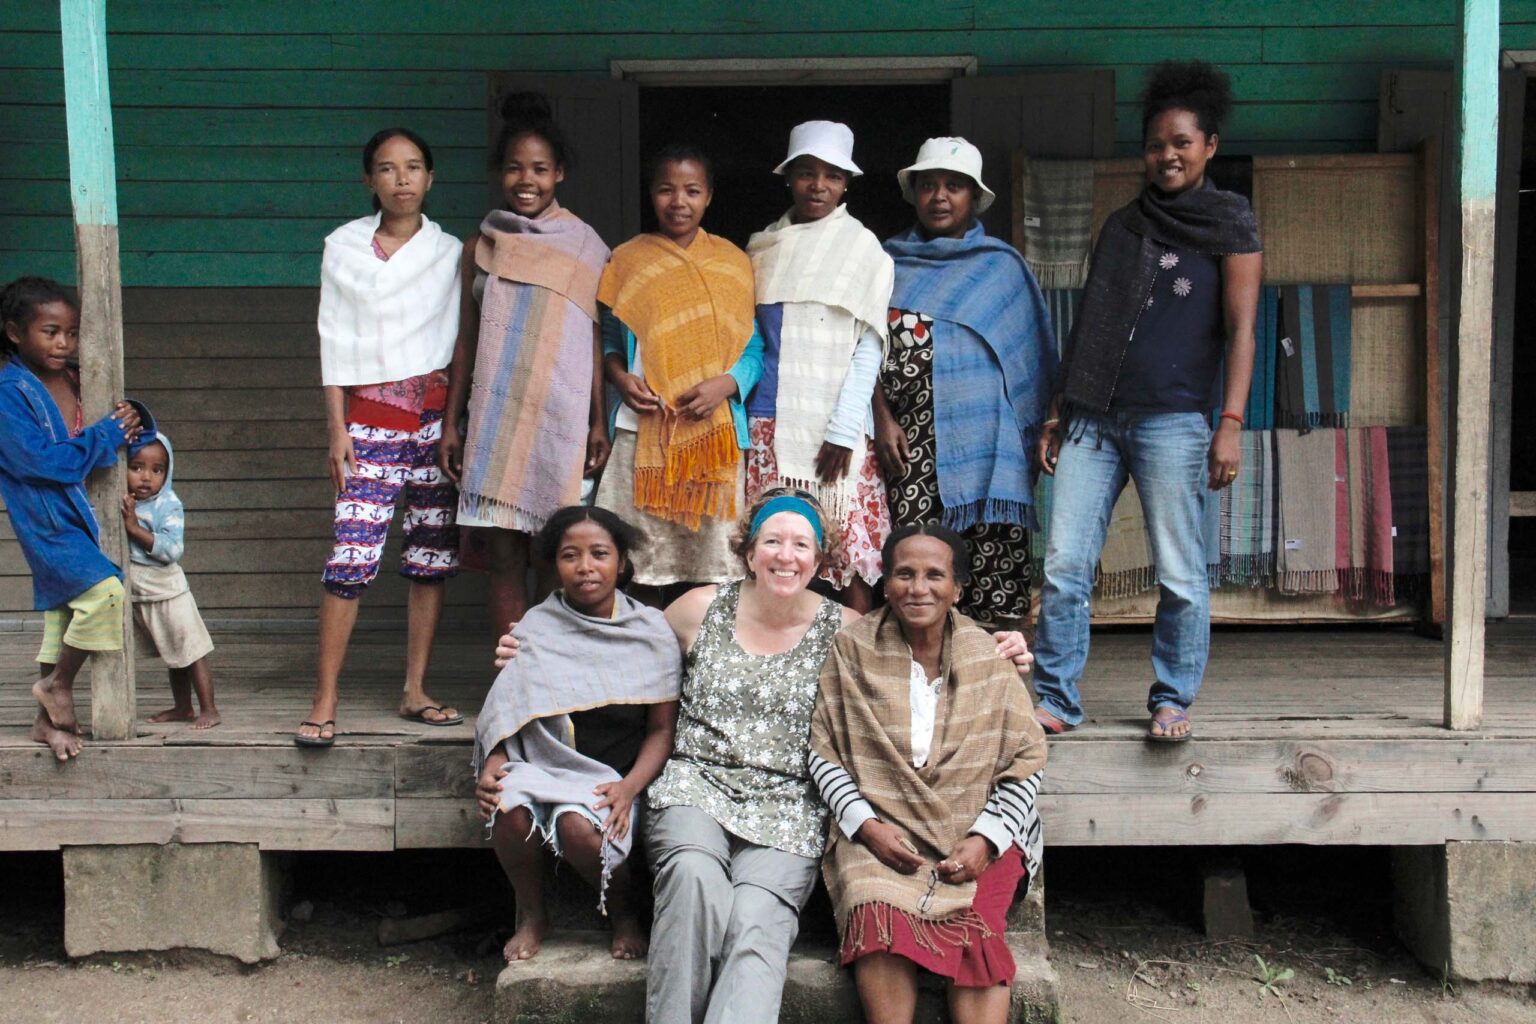 Tourist in Madagascar with local weavers showing handicrafts.